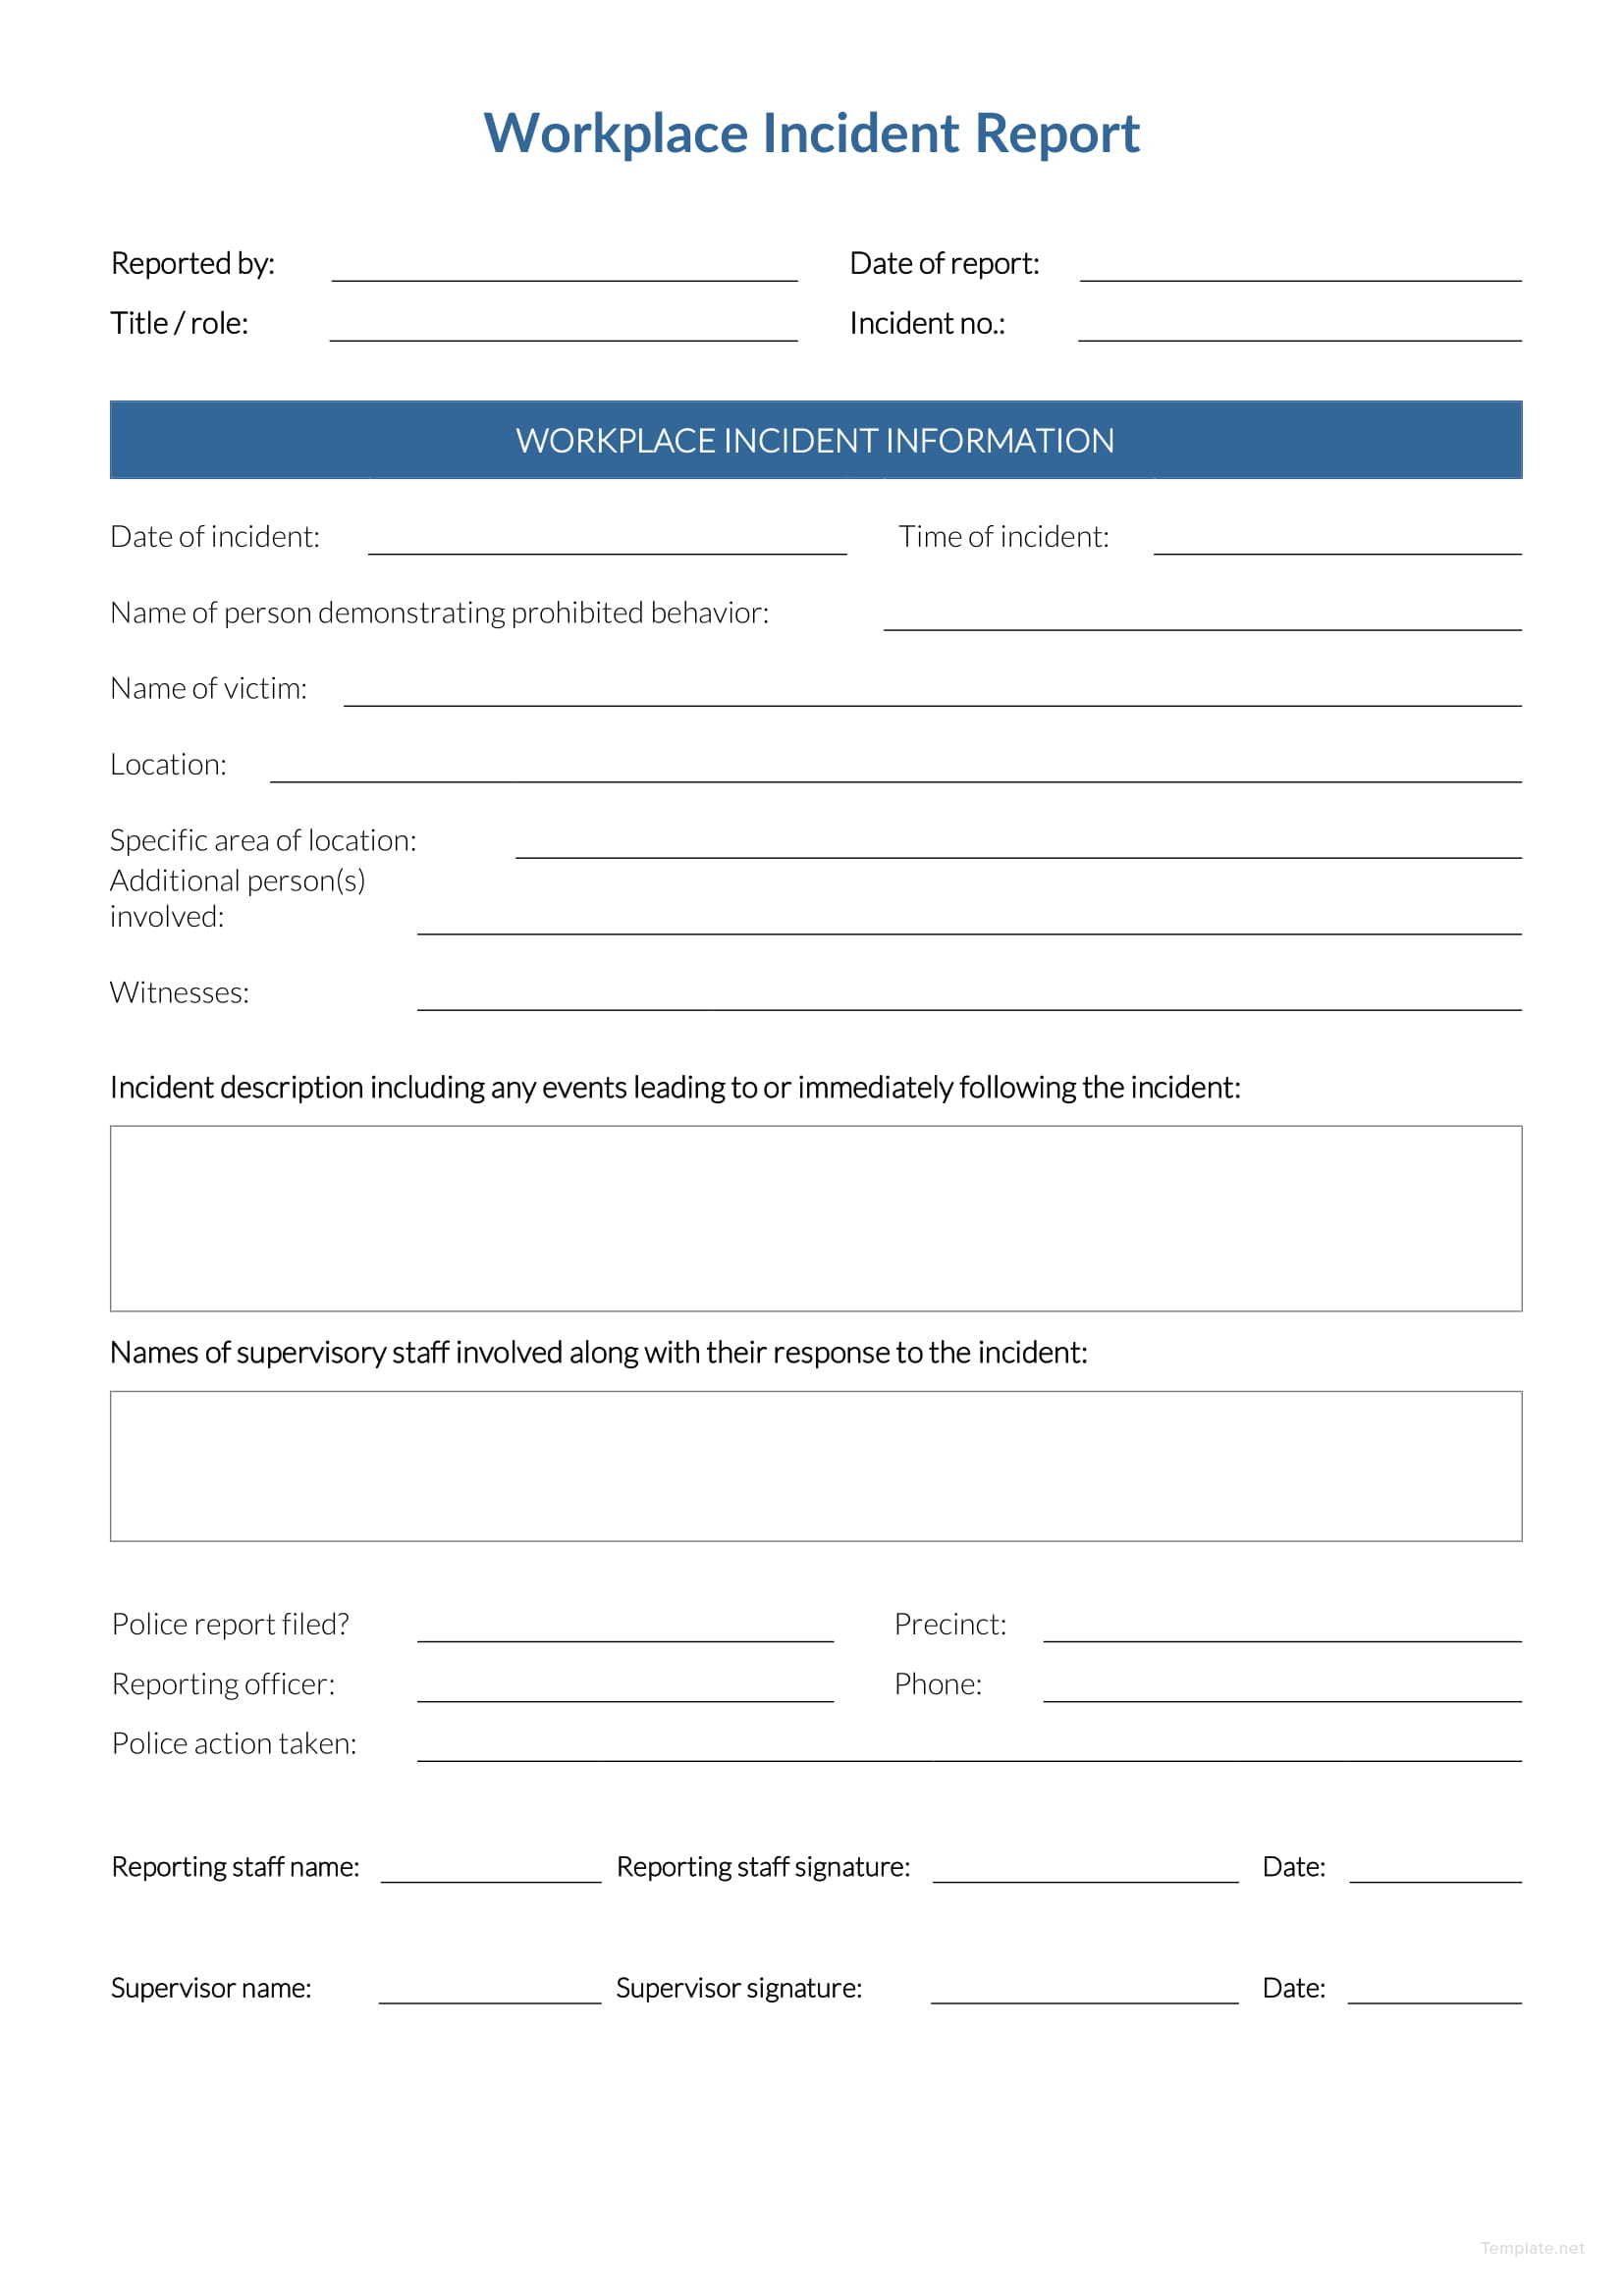 free-workplace-incident-report-form-template-nisma-info